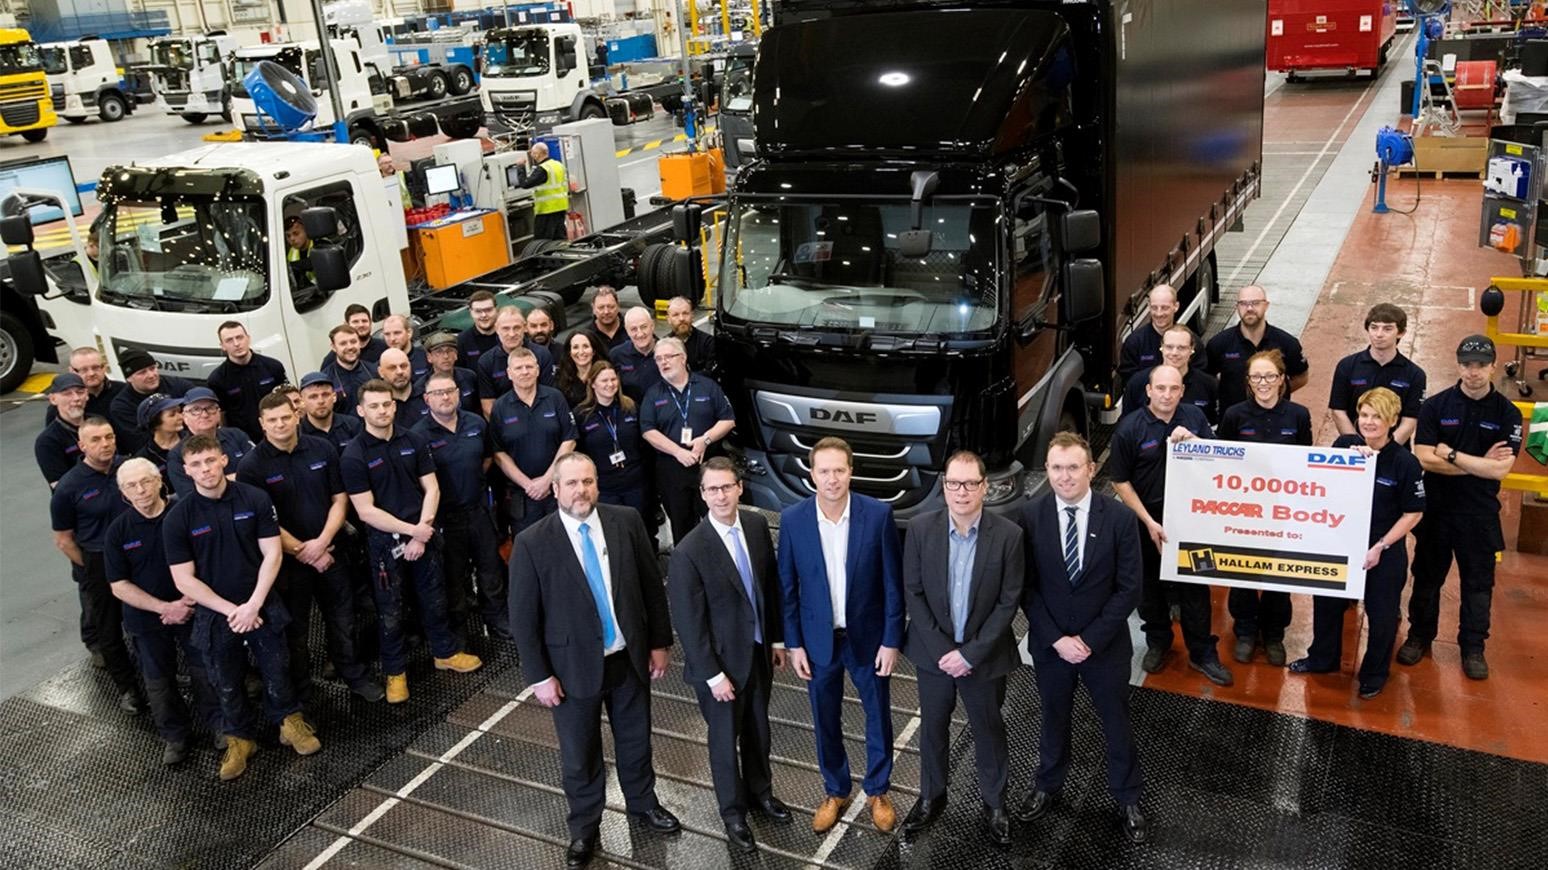 DAF Trucks Produces 10,000th PACCAR Body In Lancashire